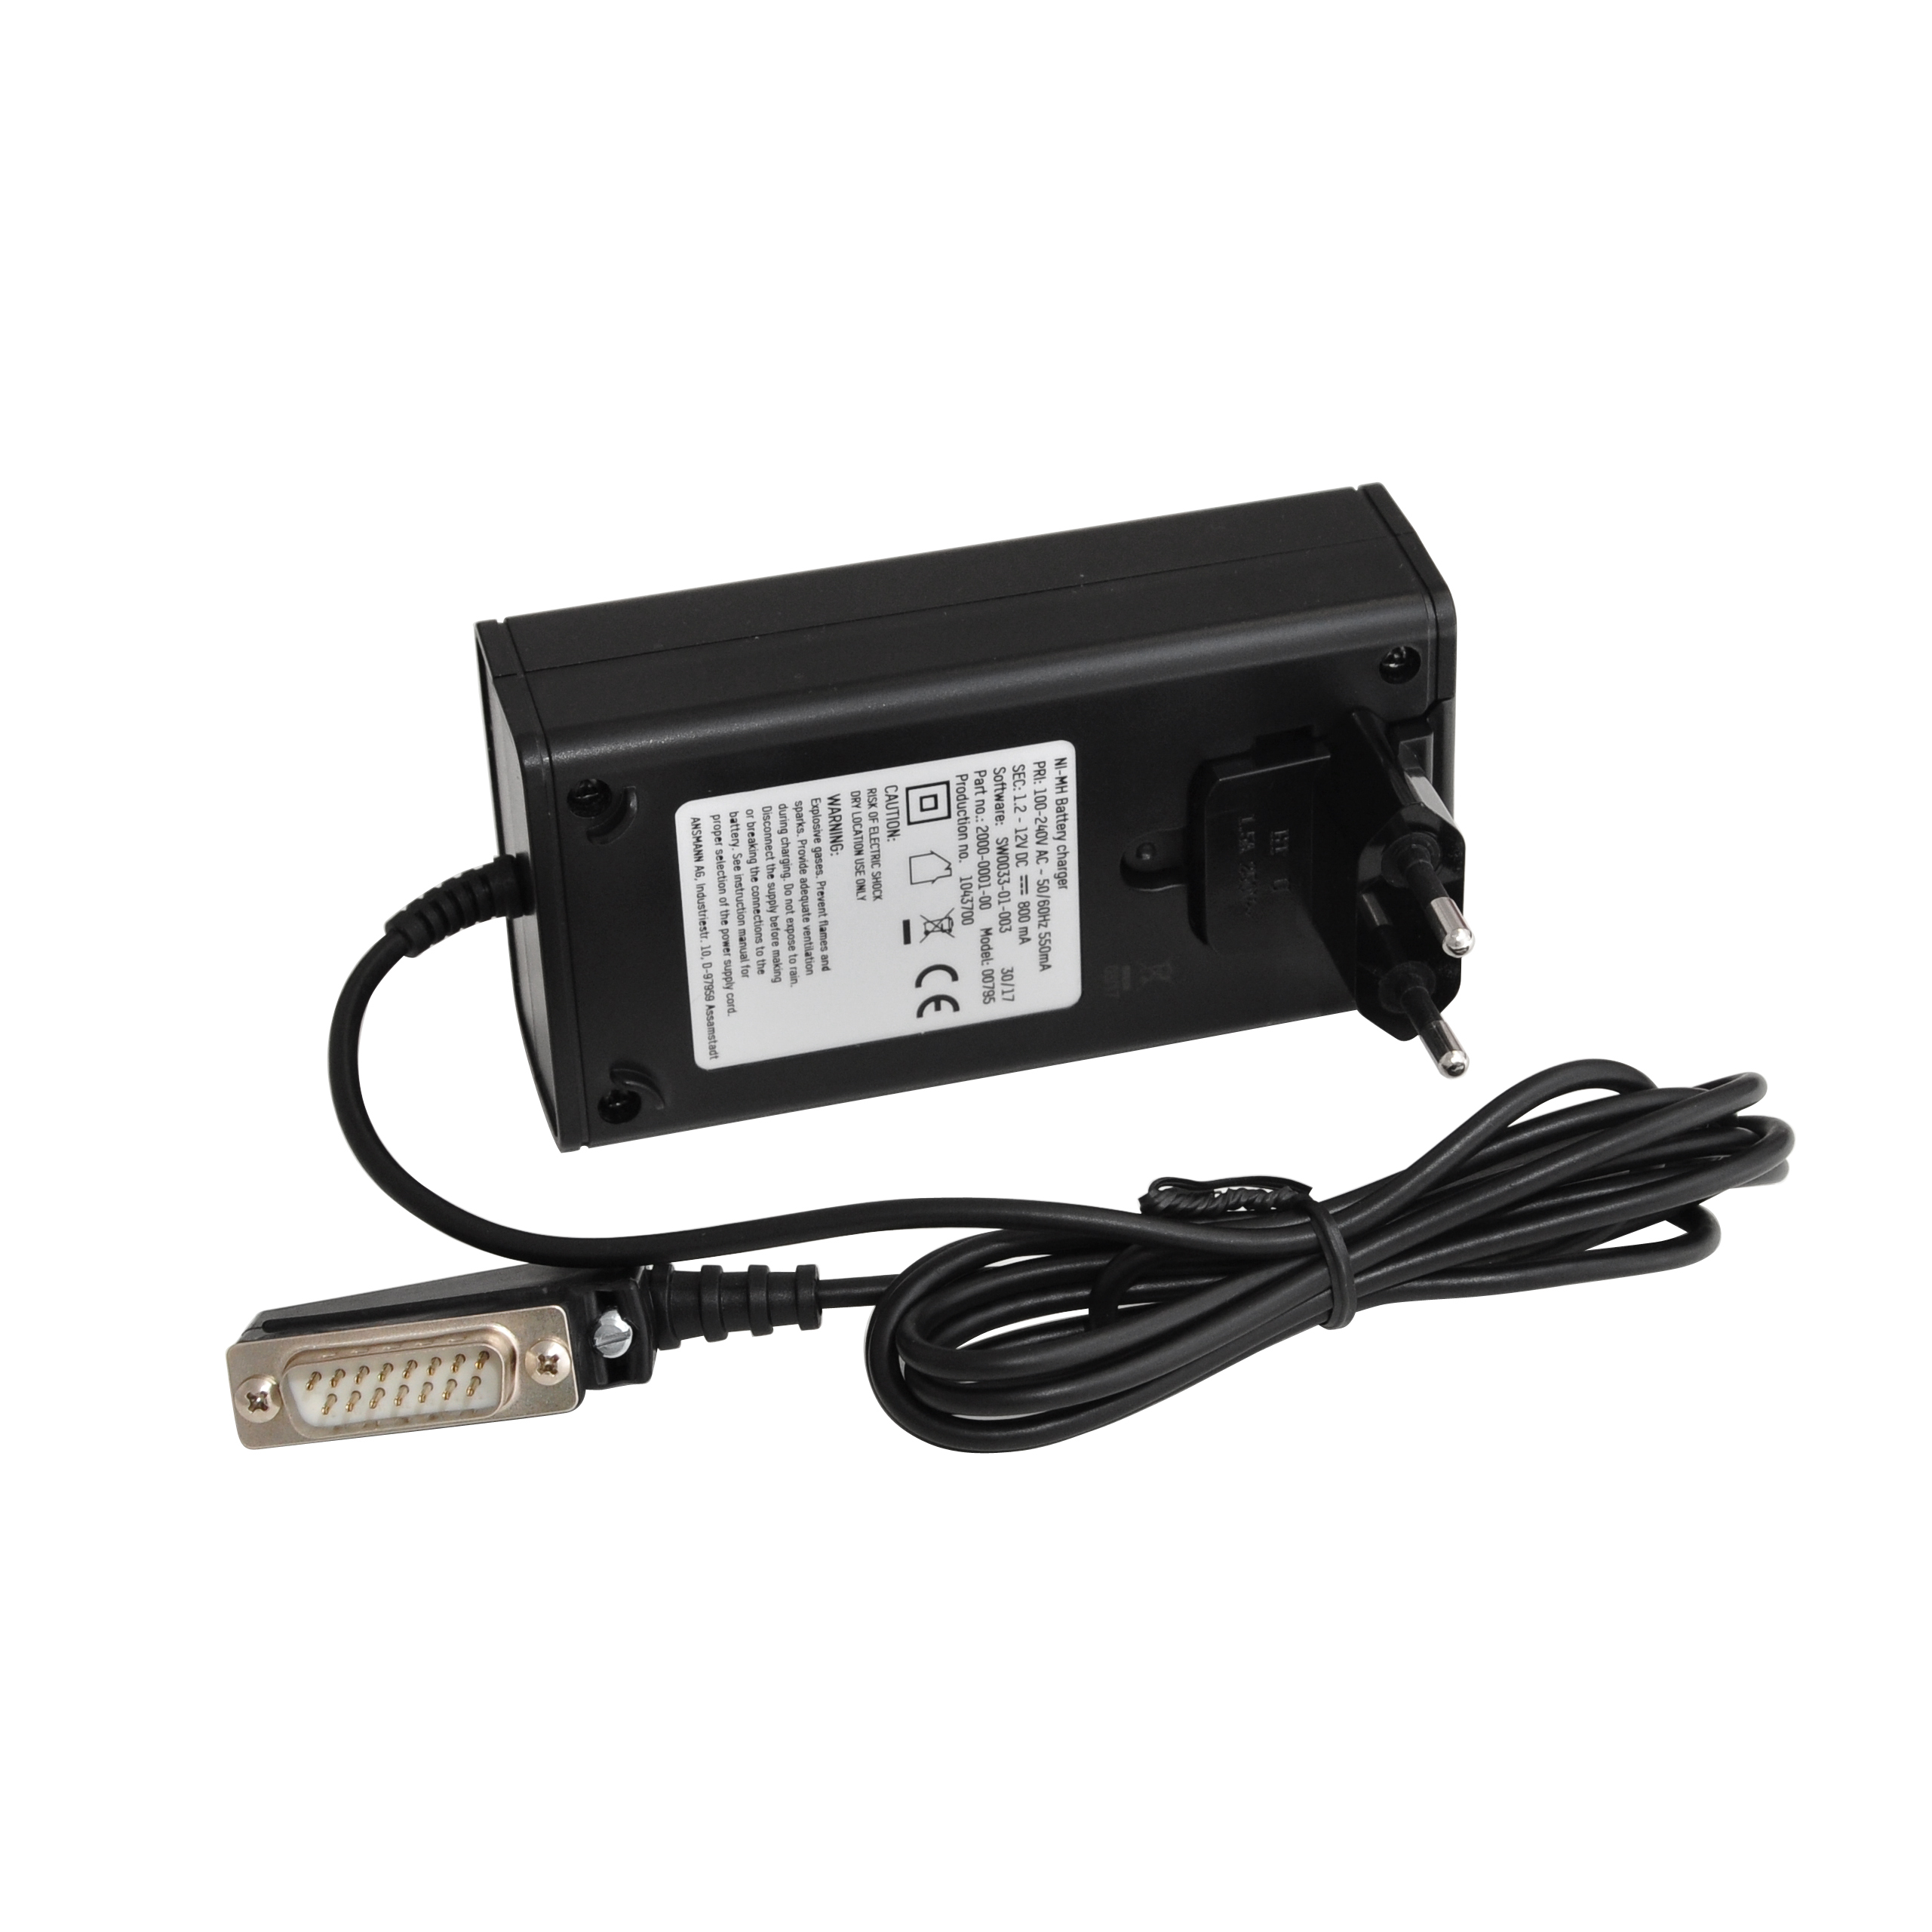 Battery Charger V2 GasTest delta 2006 / Thermal printer 112 mm for charging with mains operation 100 - 240 V